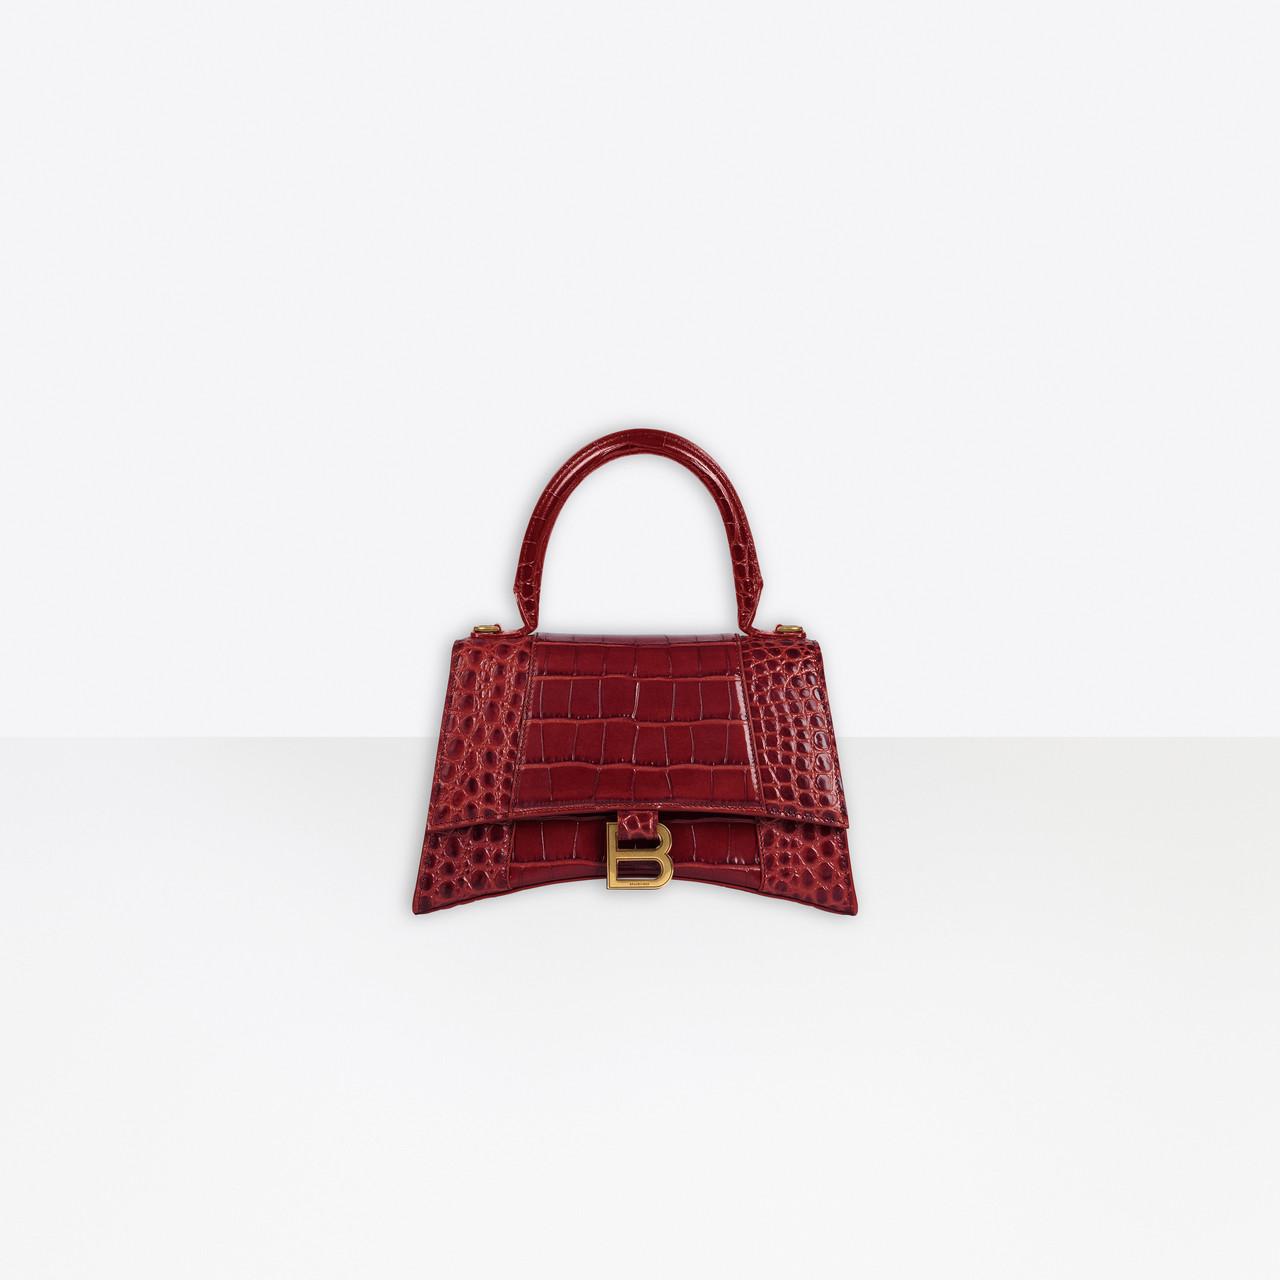 Balenciaga Leather Hourglass Small Top Handle Bag in Burgundy (Red) - Lyst